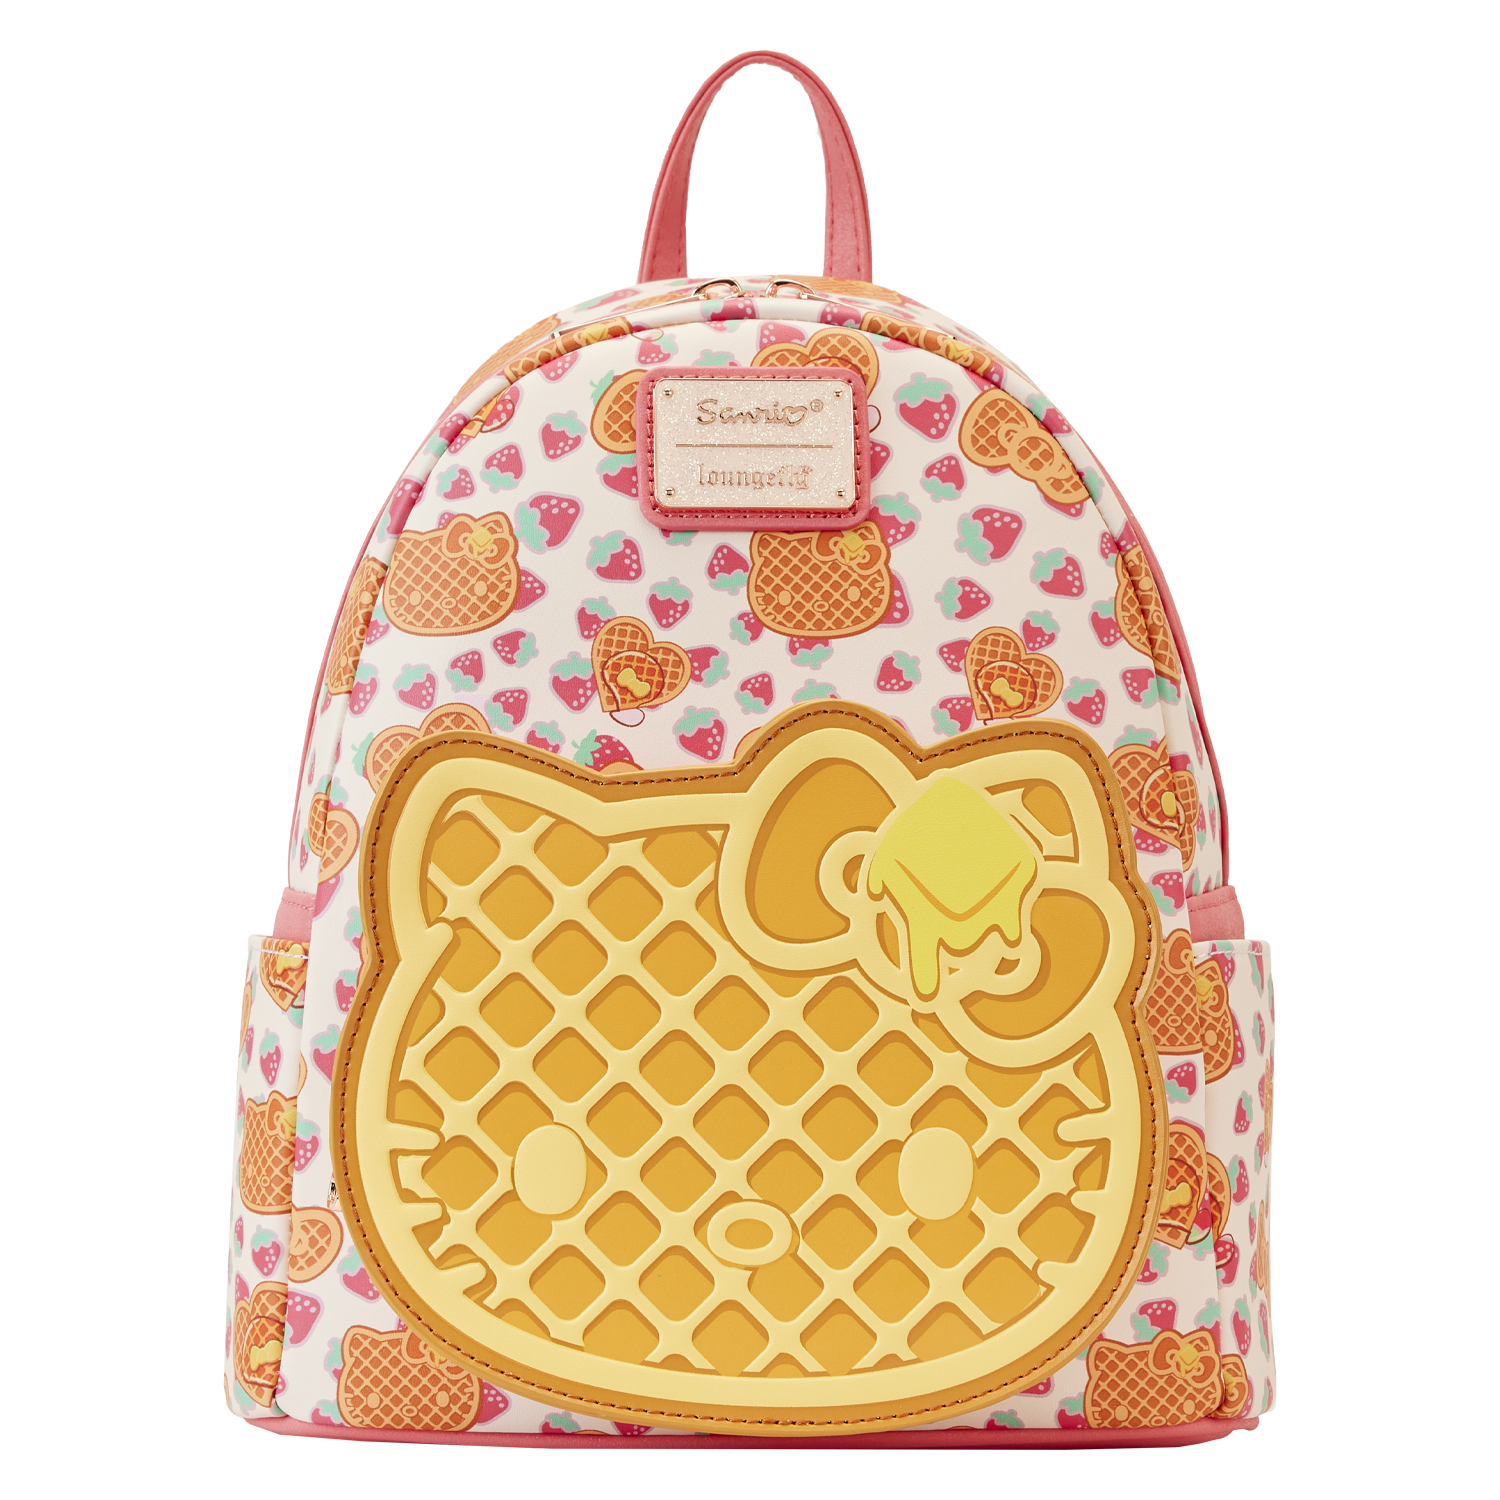 Disney 100th Mickey Mouse Club Mini Backpack – Stage Nine Entertainment  Store